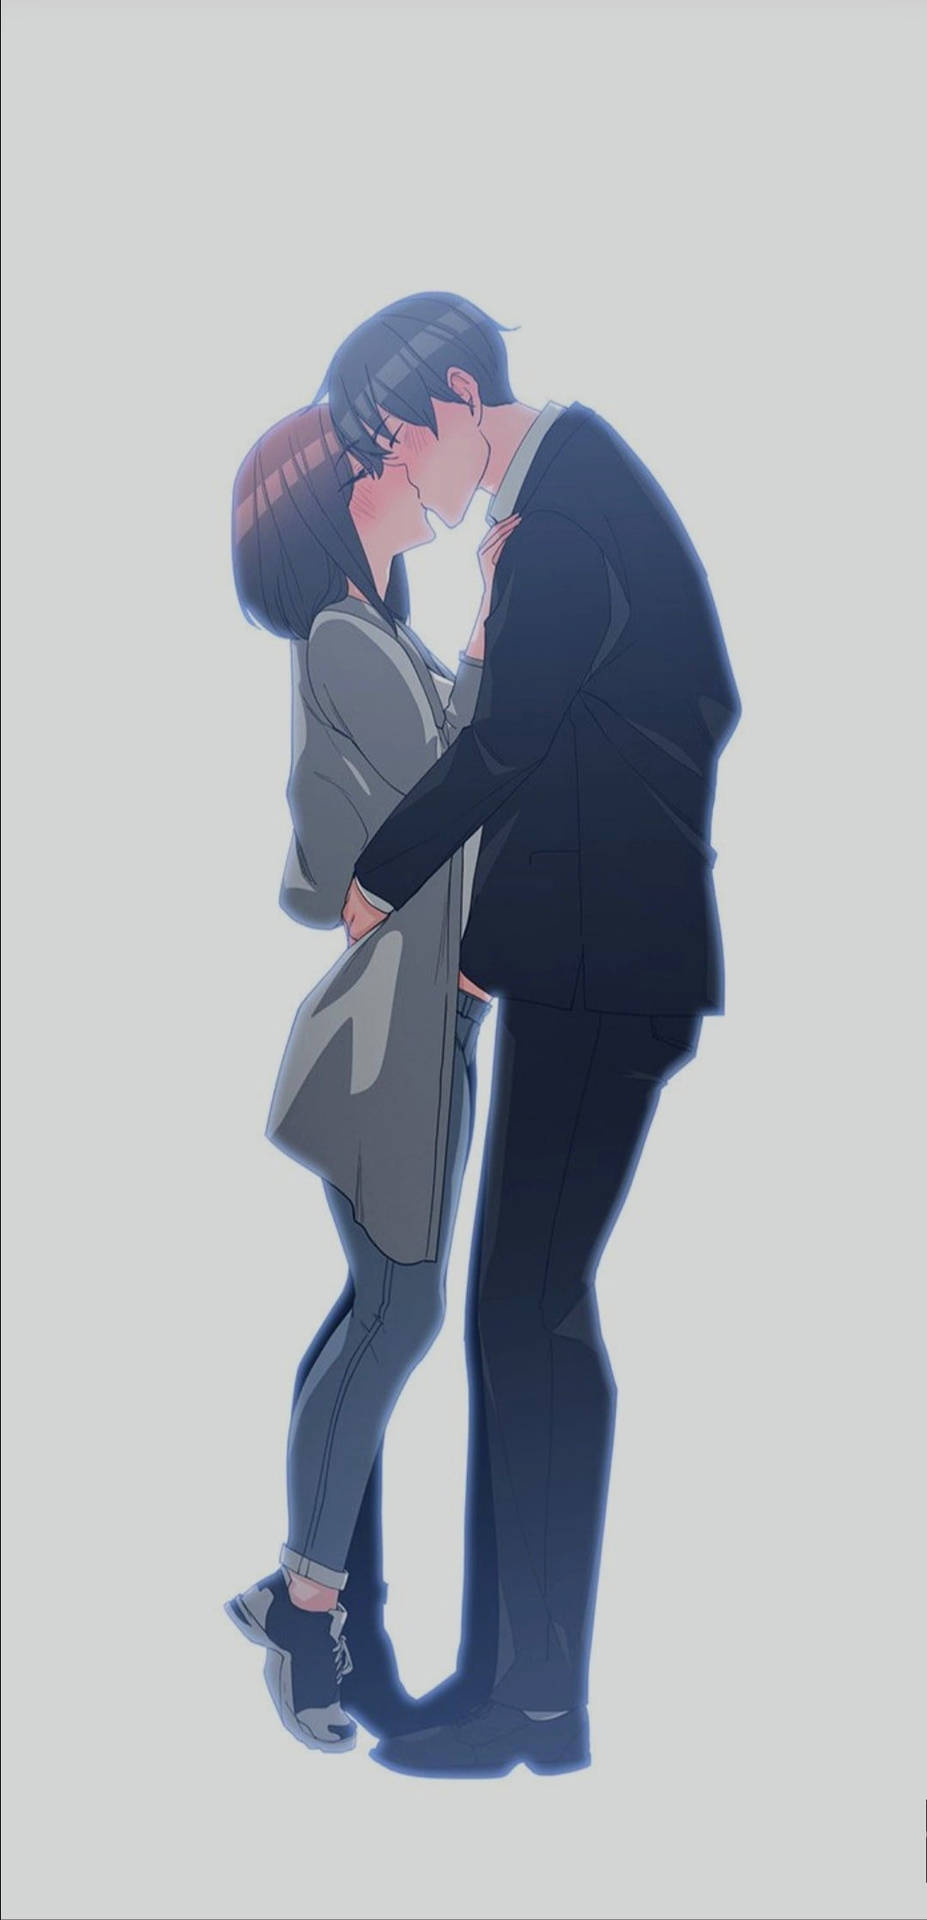 Fore head kiss - anime Wallpaper Download | MobCup-hanic.com.vn